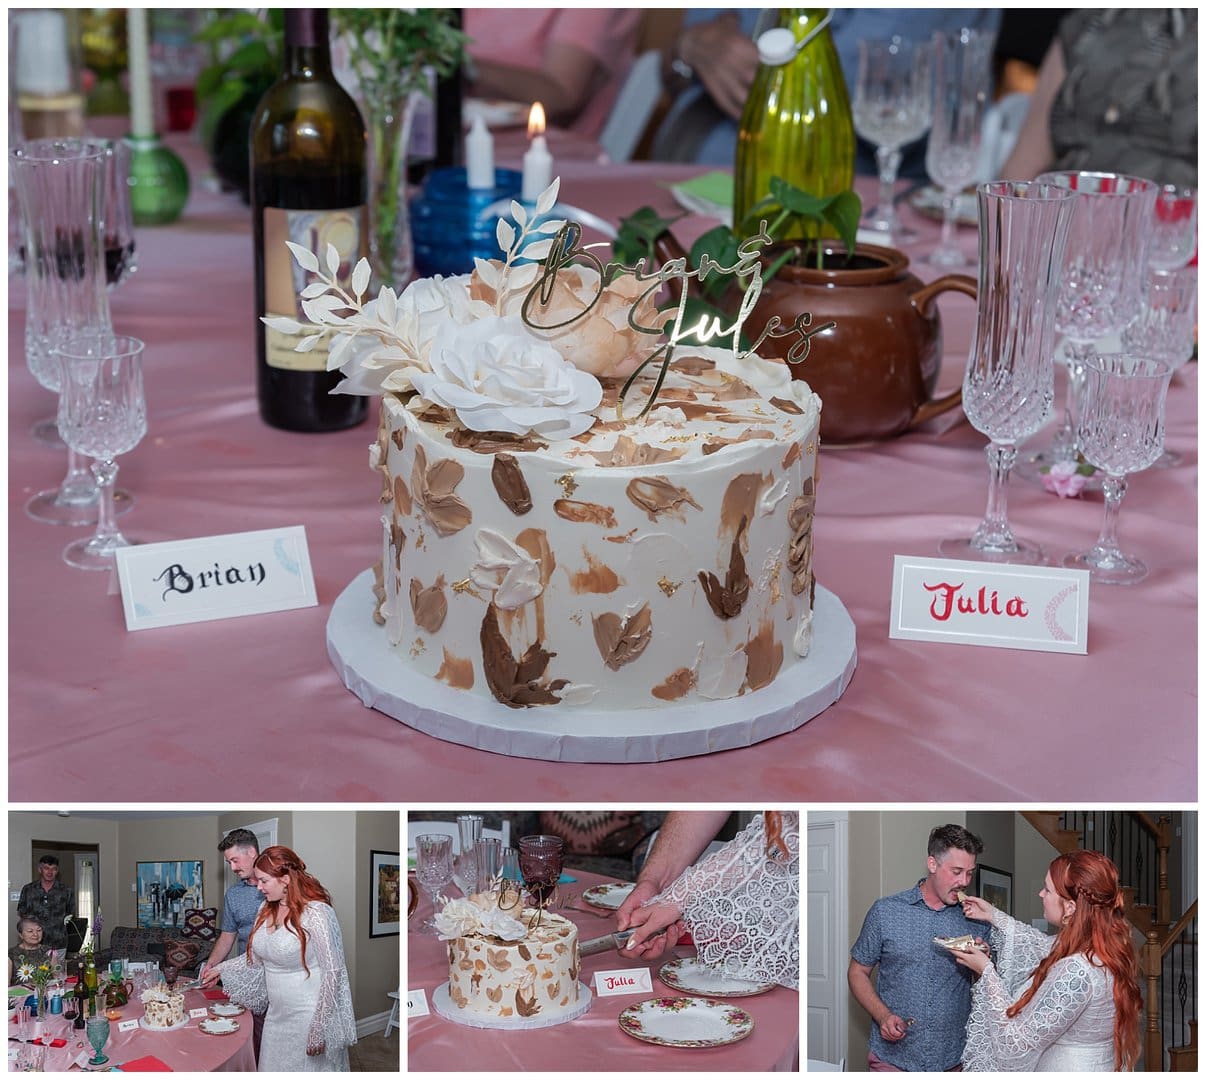 The bride and groom cut their cake during their Aidbnb wedding in Bear Cove NS and then feed each other cake.